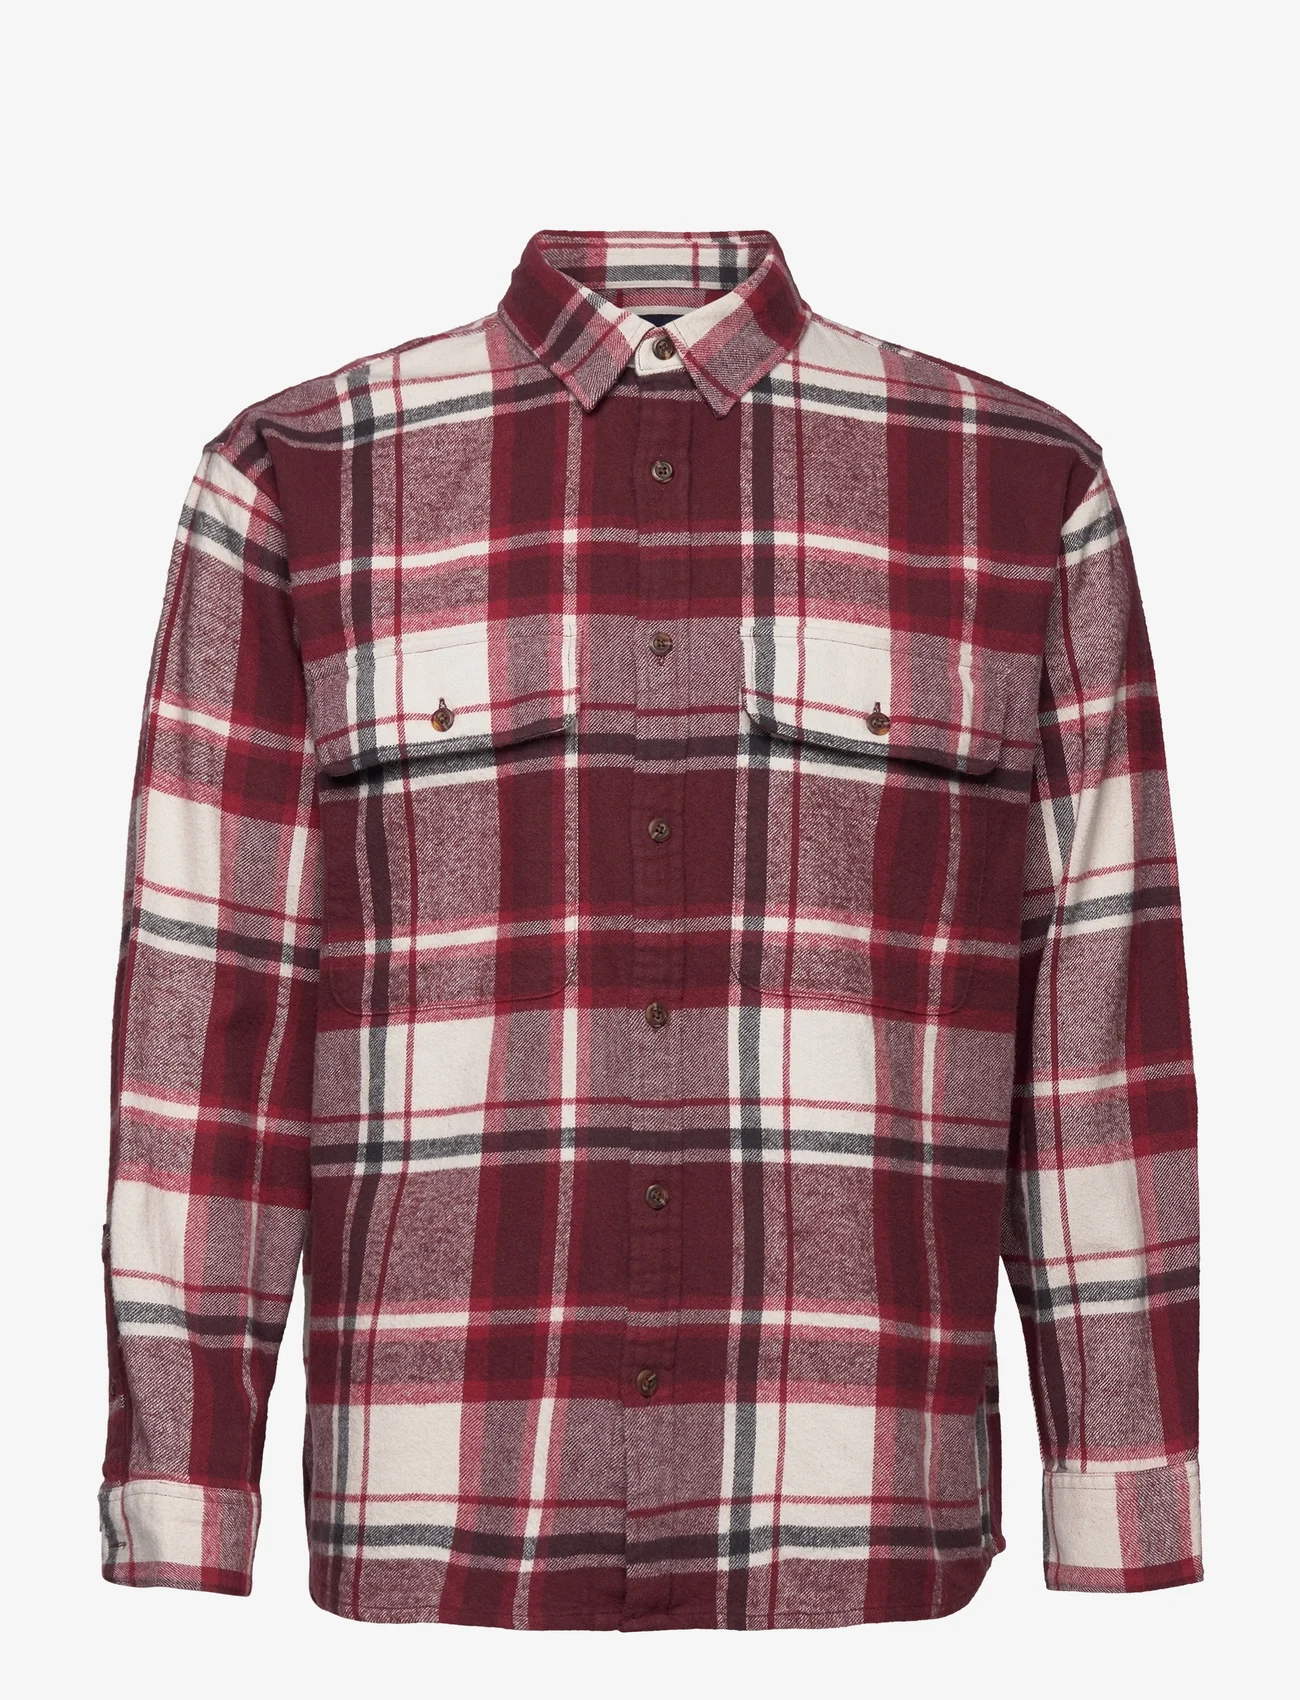 Abercrombie & Fitch - ANF MENS WOVENS - ruutupaidat - burgundy plaid - 0